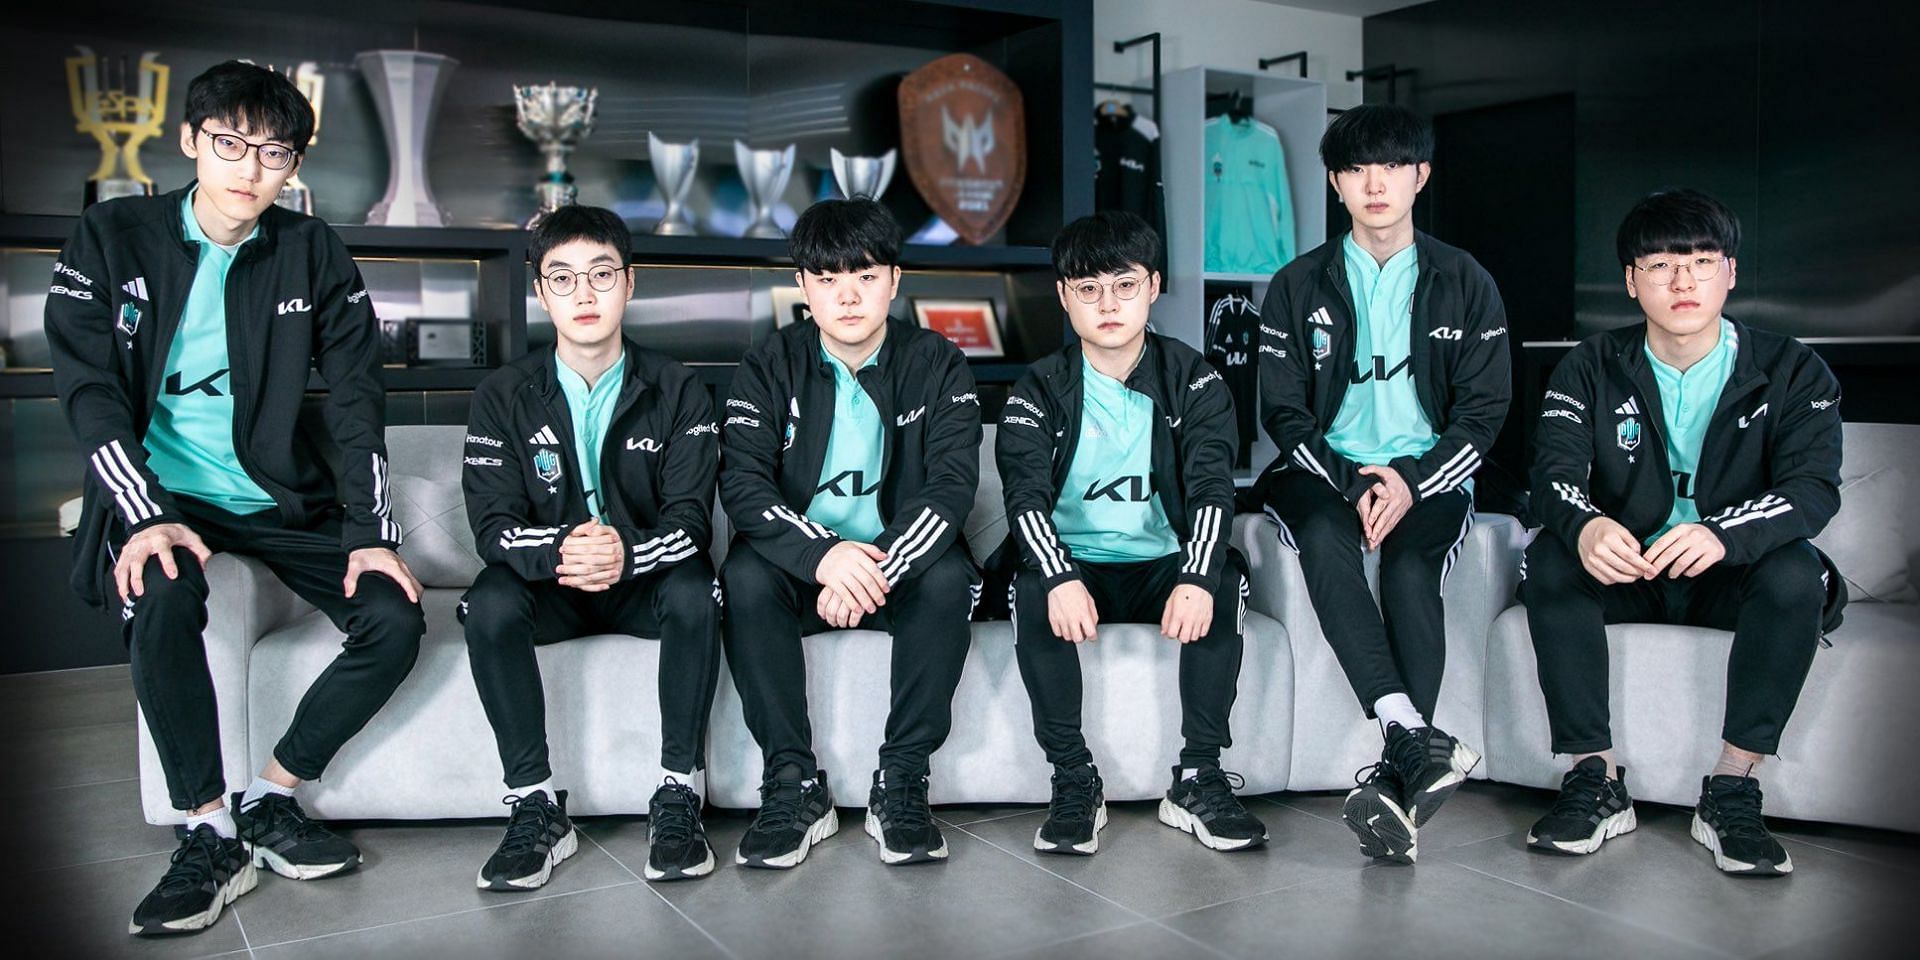 DAMWON KIA might be able to reach the finals of Worlds 2022 (Image via League of Legends)